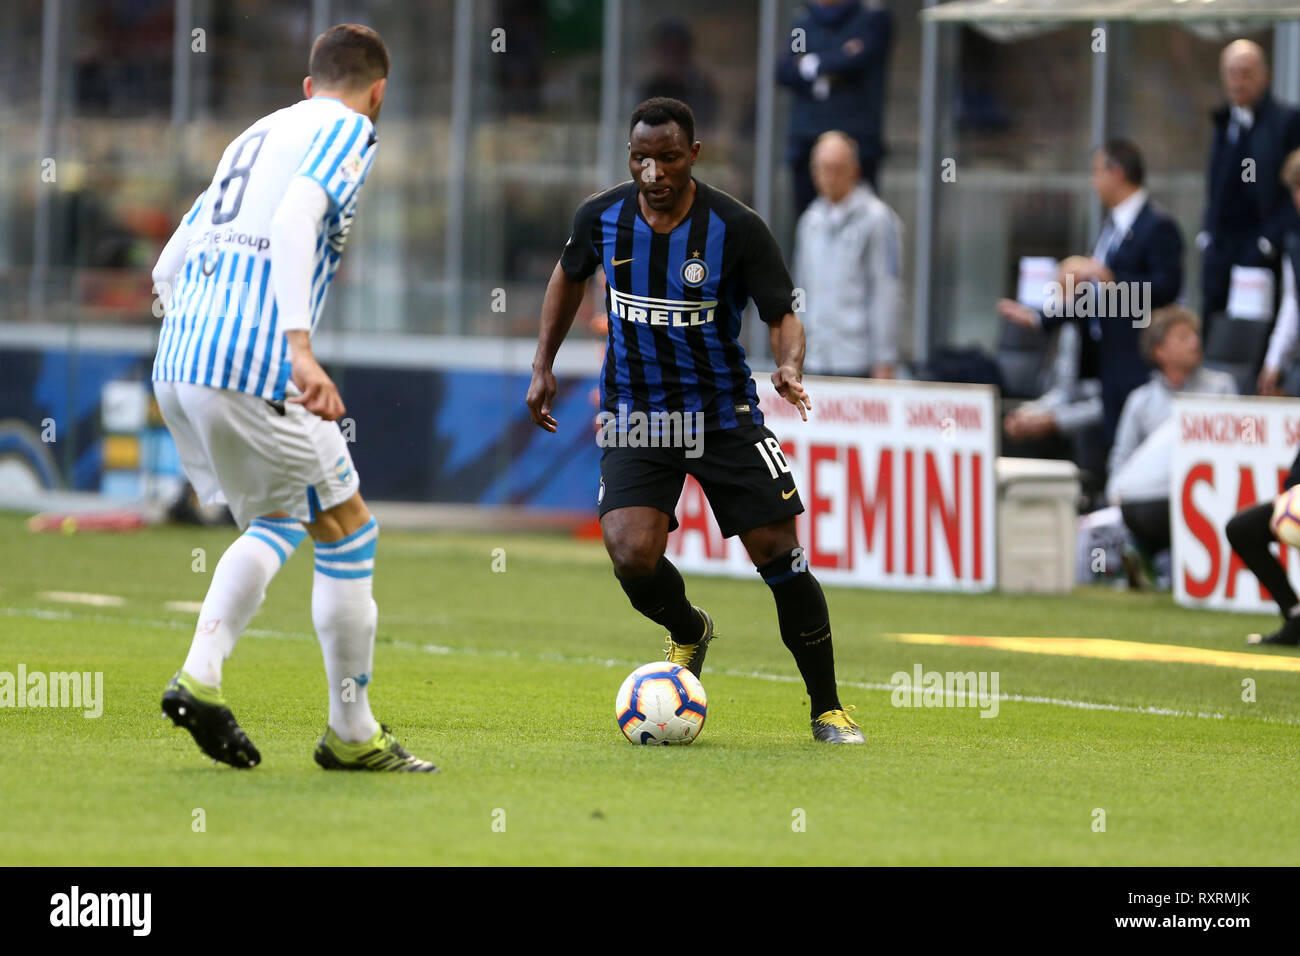 Milano, Italy. 10th March 2019.  Kwadwo Asamoah of FC Internazionale in action during the Serie A match between FC Internazionale and Spal. Credit: Marco Canoniero/Alamy Live News Stock Photo